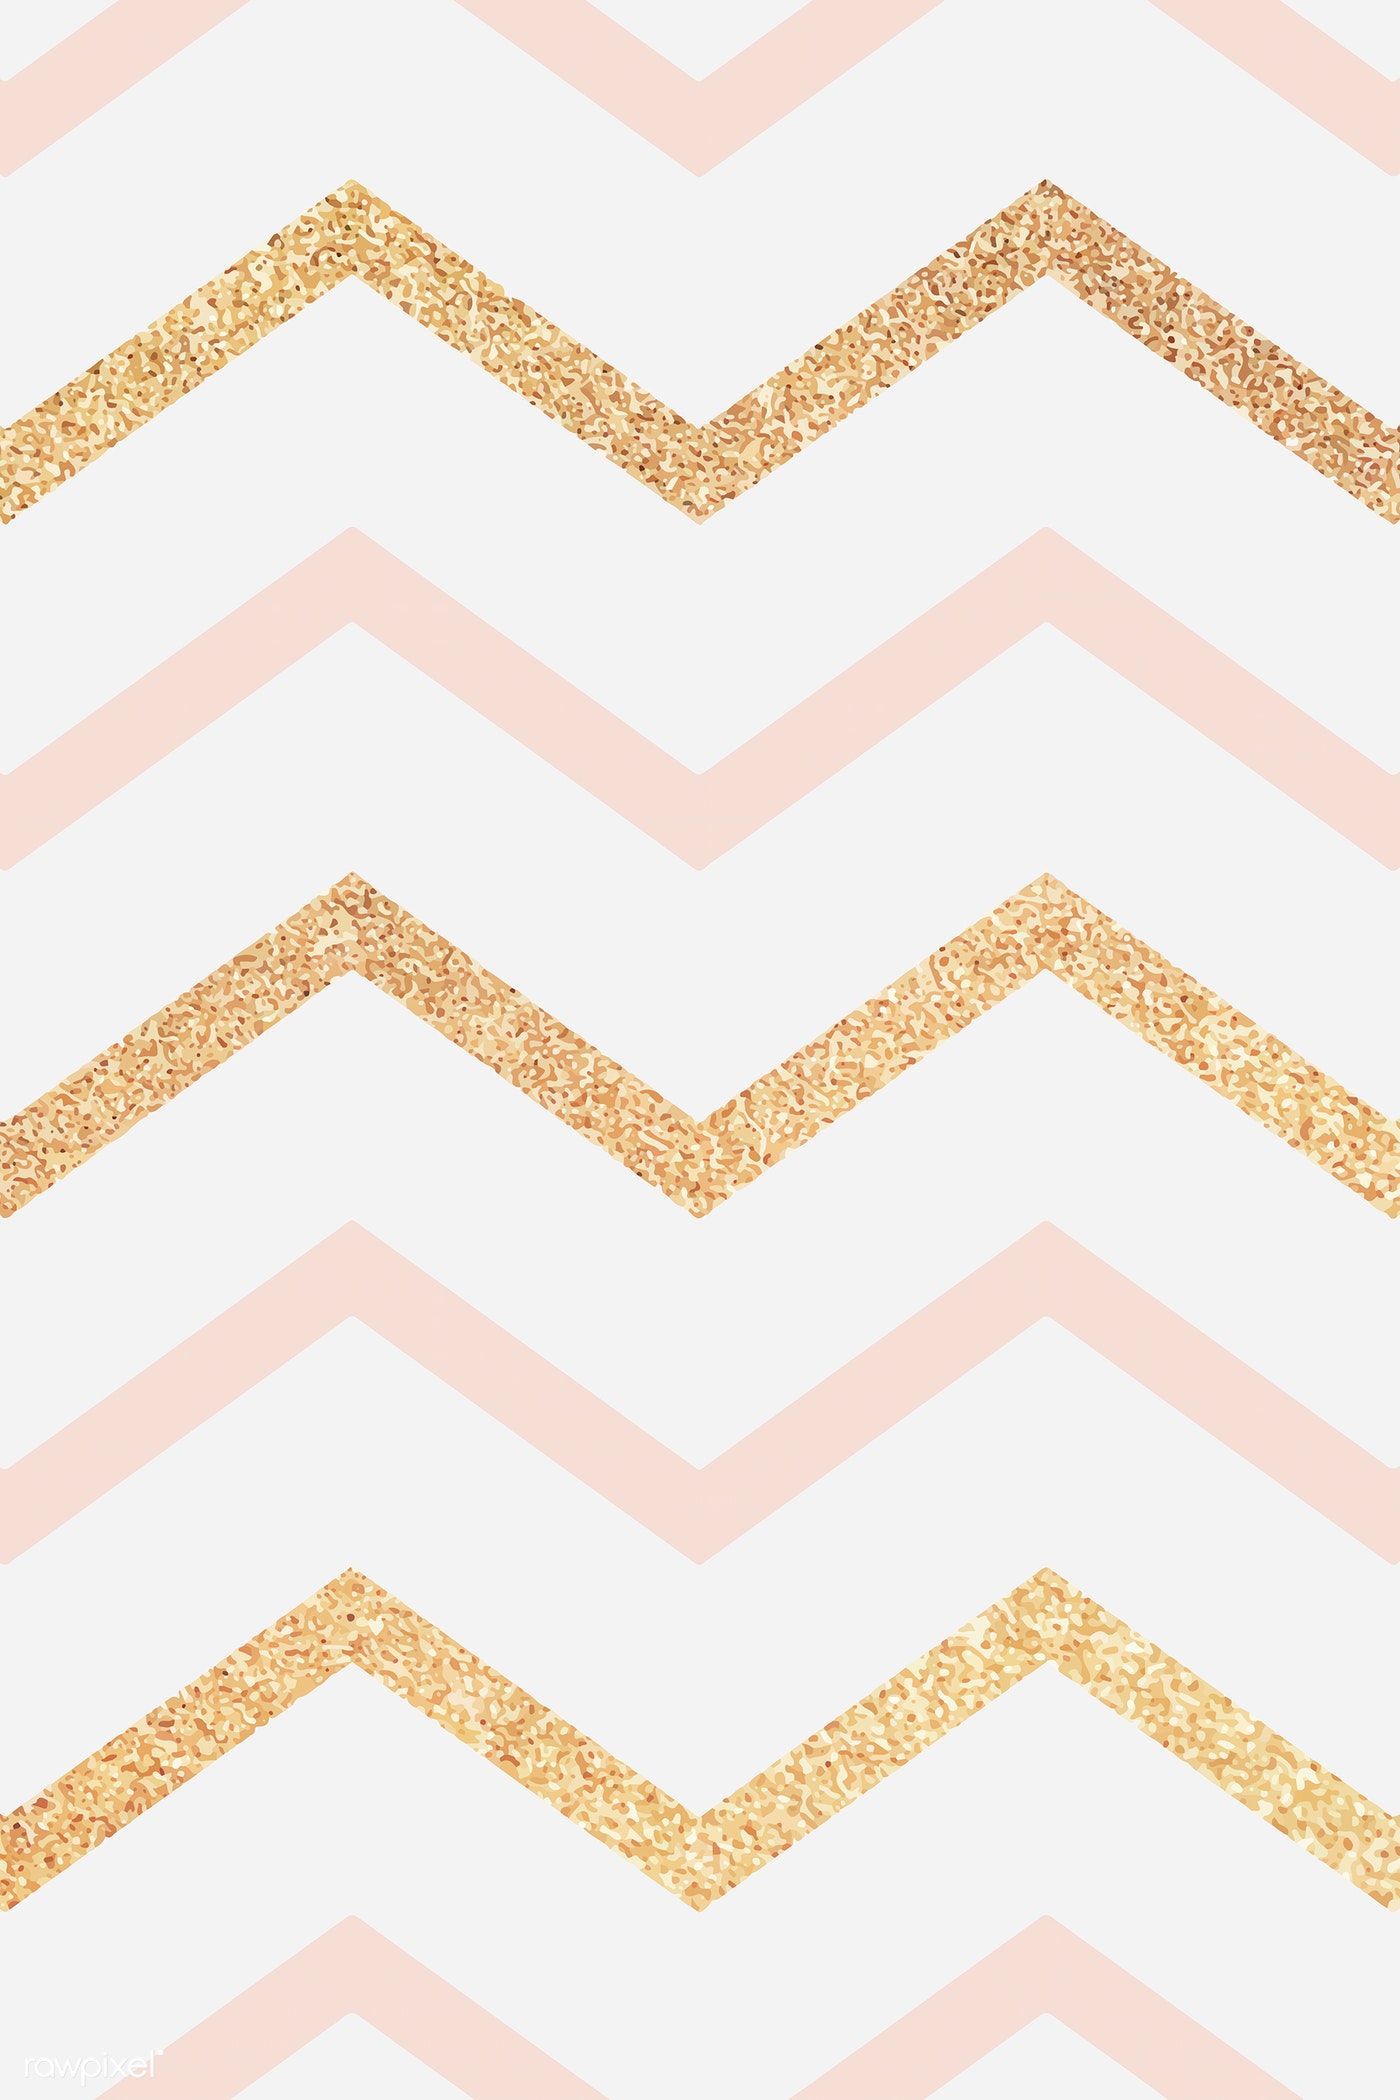 Download premium vector of Pink and gold glittery zigzag patterned. Gold wallpaper background, Cute patterns wallpaper, Pink and gold wallpaper